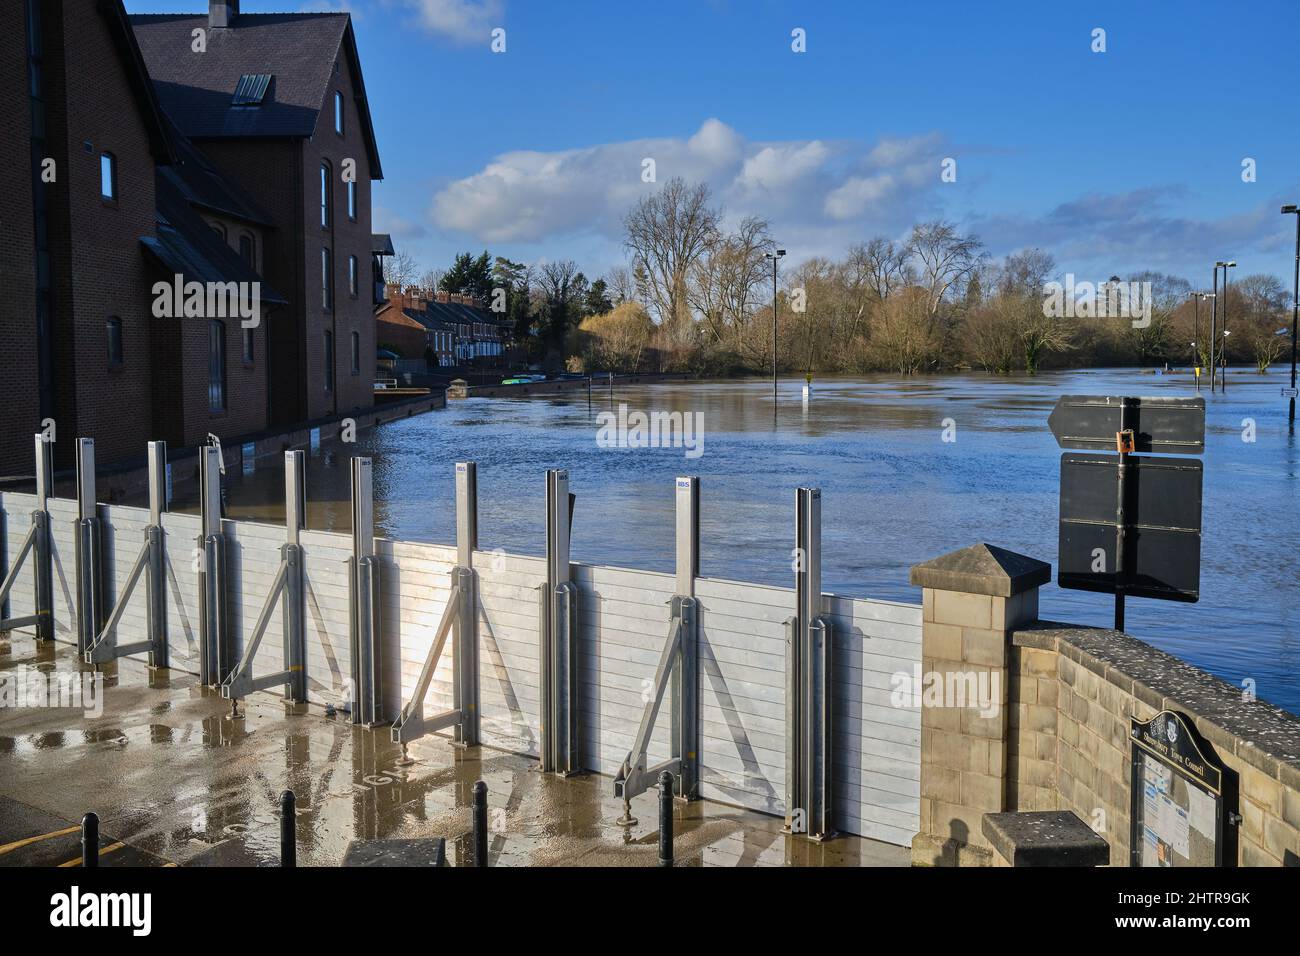 Temporary flood barriers by the River Severn in Shrewsbury, UK Stock Photo